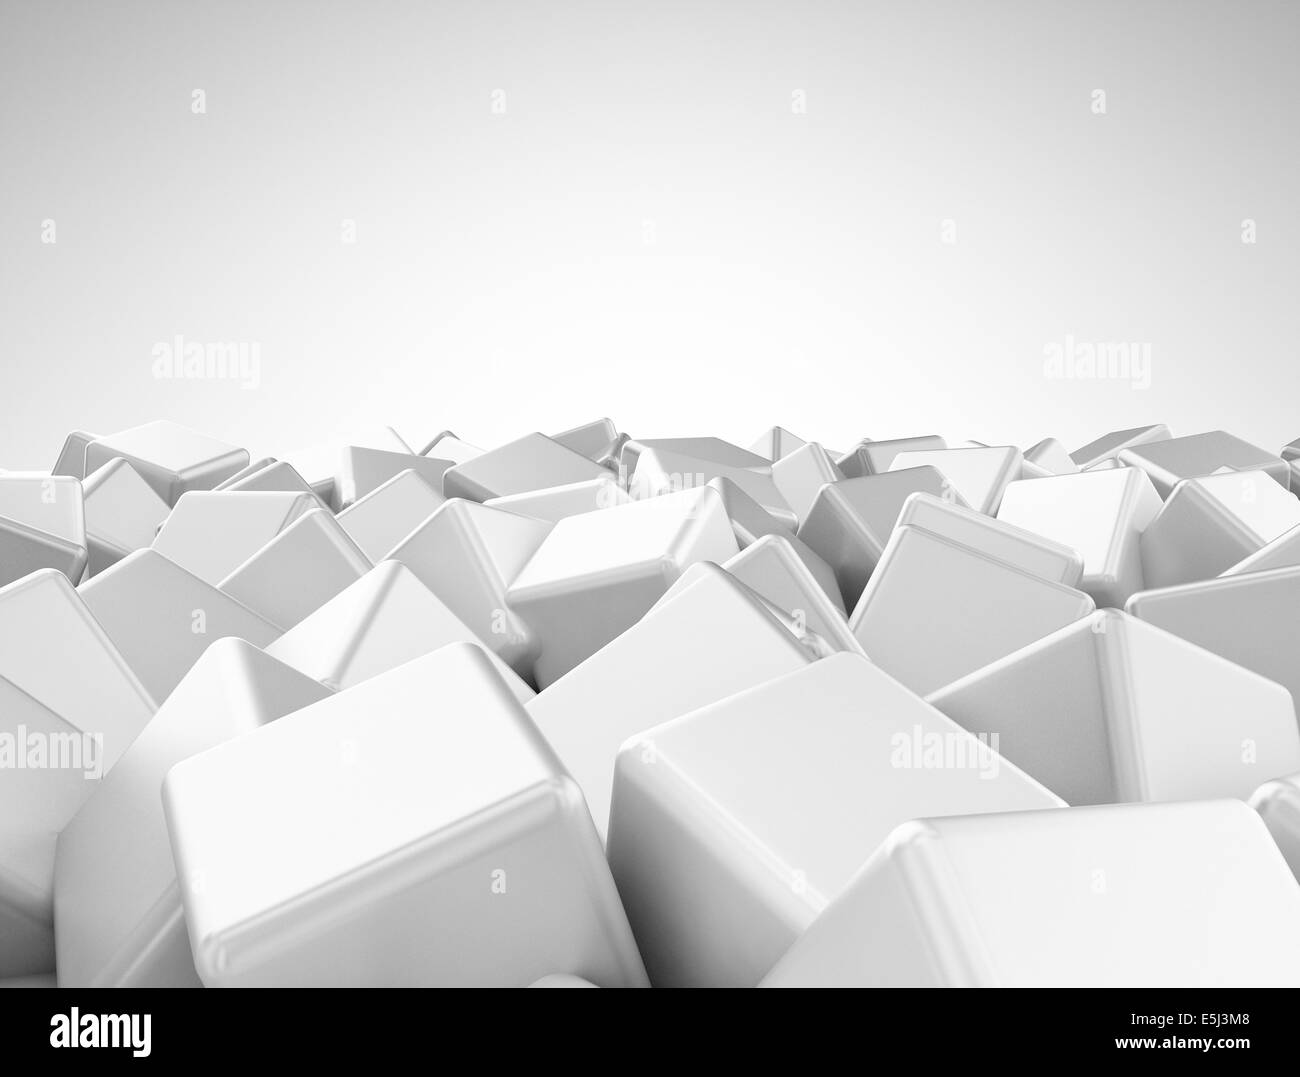 Abstract digital illustration of chaotic 3d cubes Stock Photo